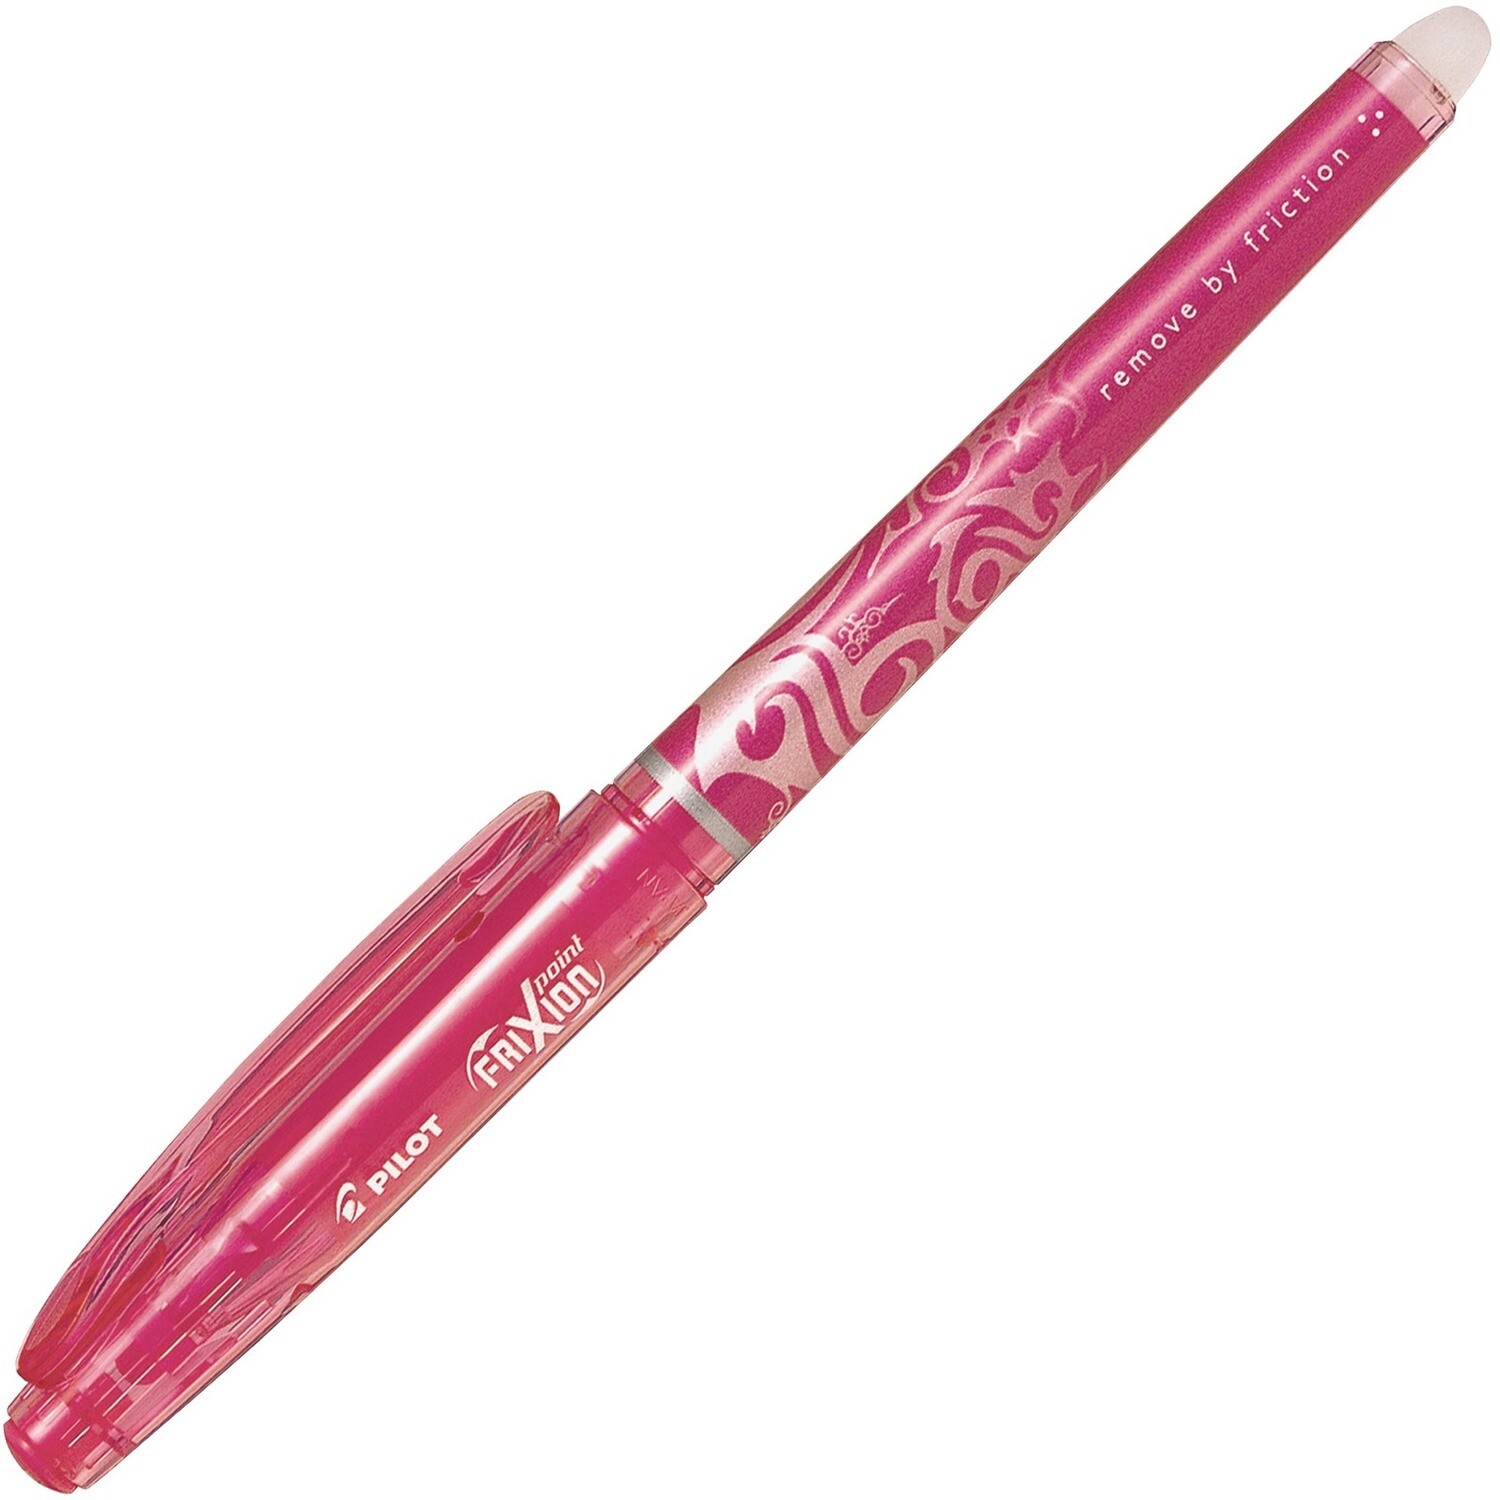 Pen, Erasable, Gel Rollerball, FriXion Pink, Single, 0.5 Mm,  Refillable